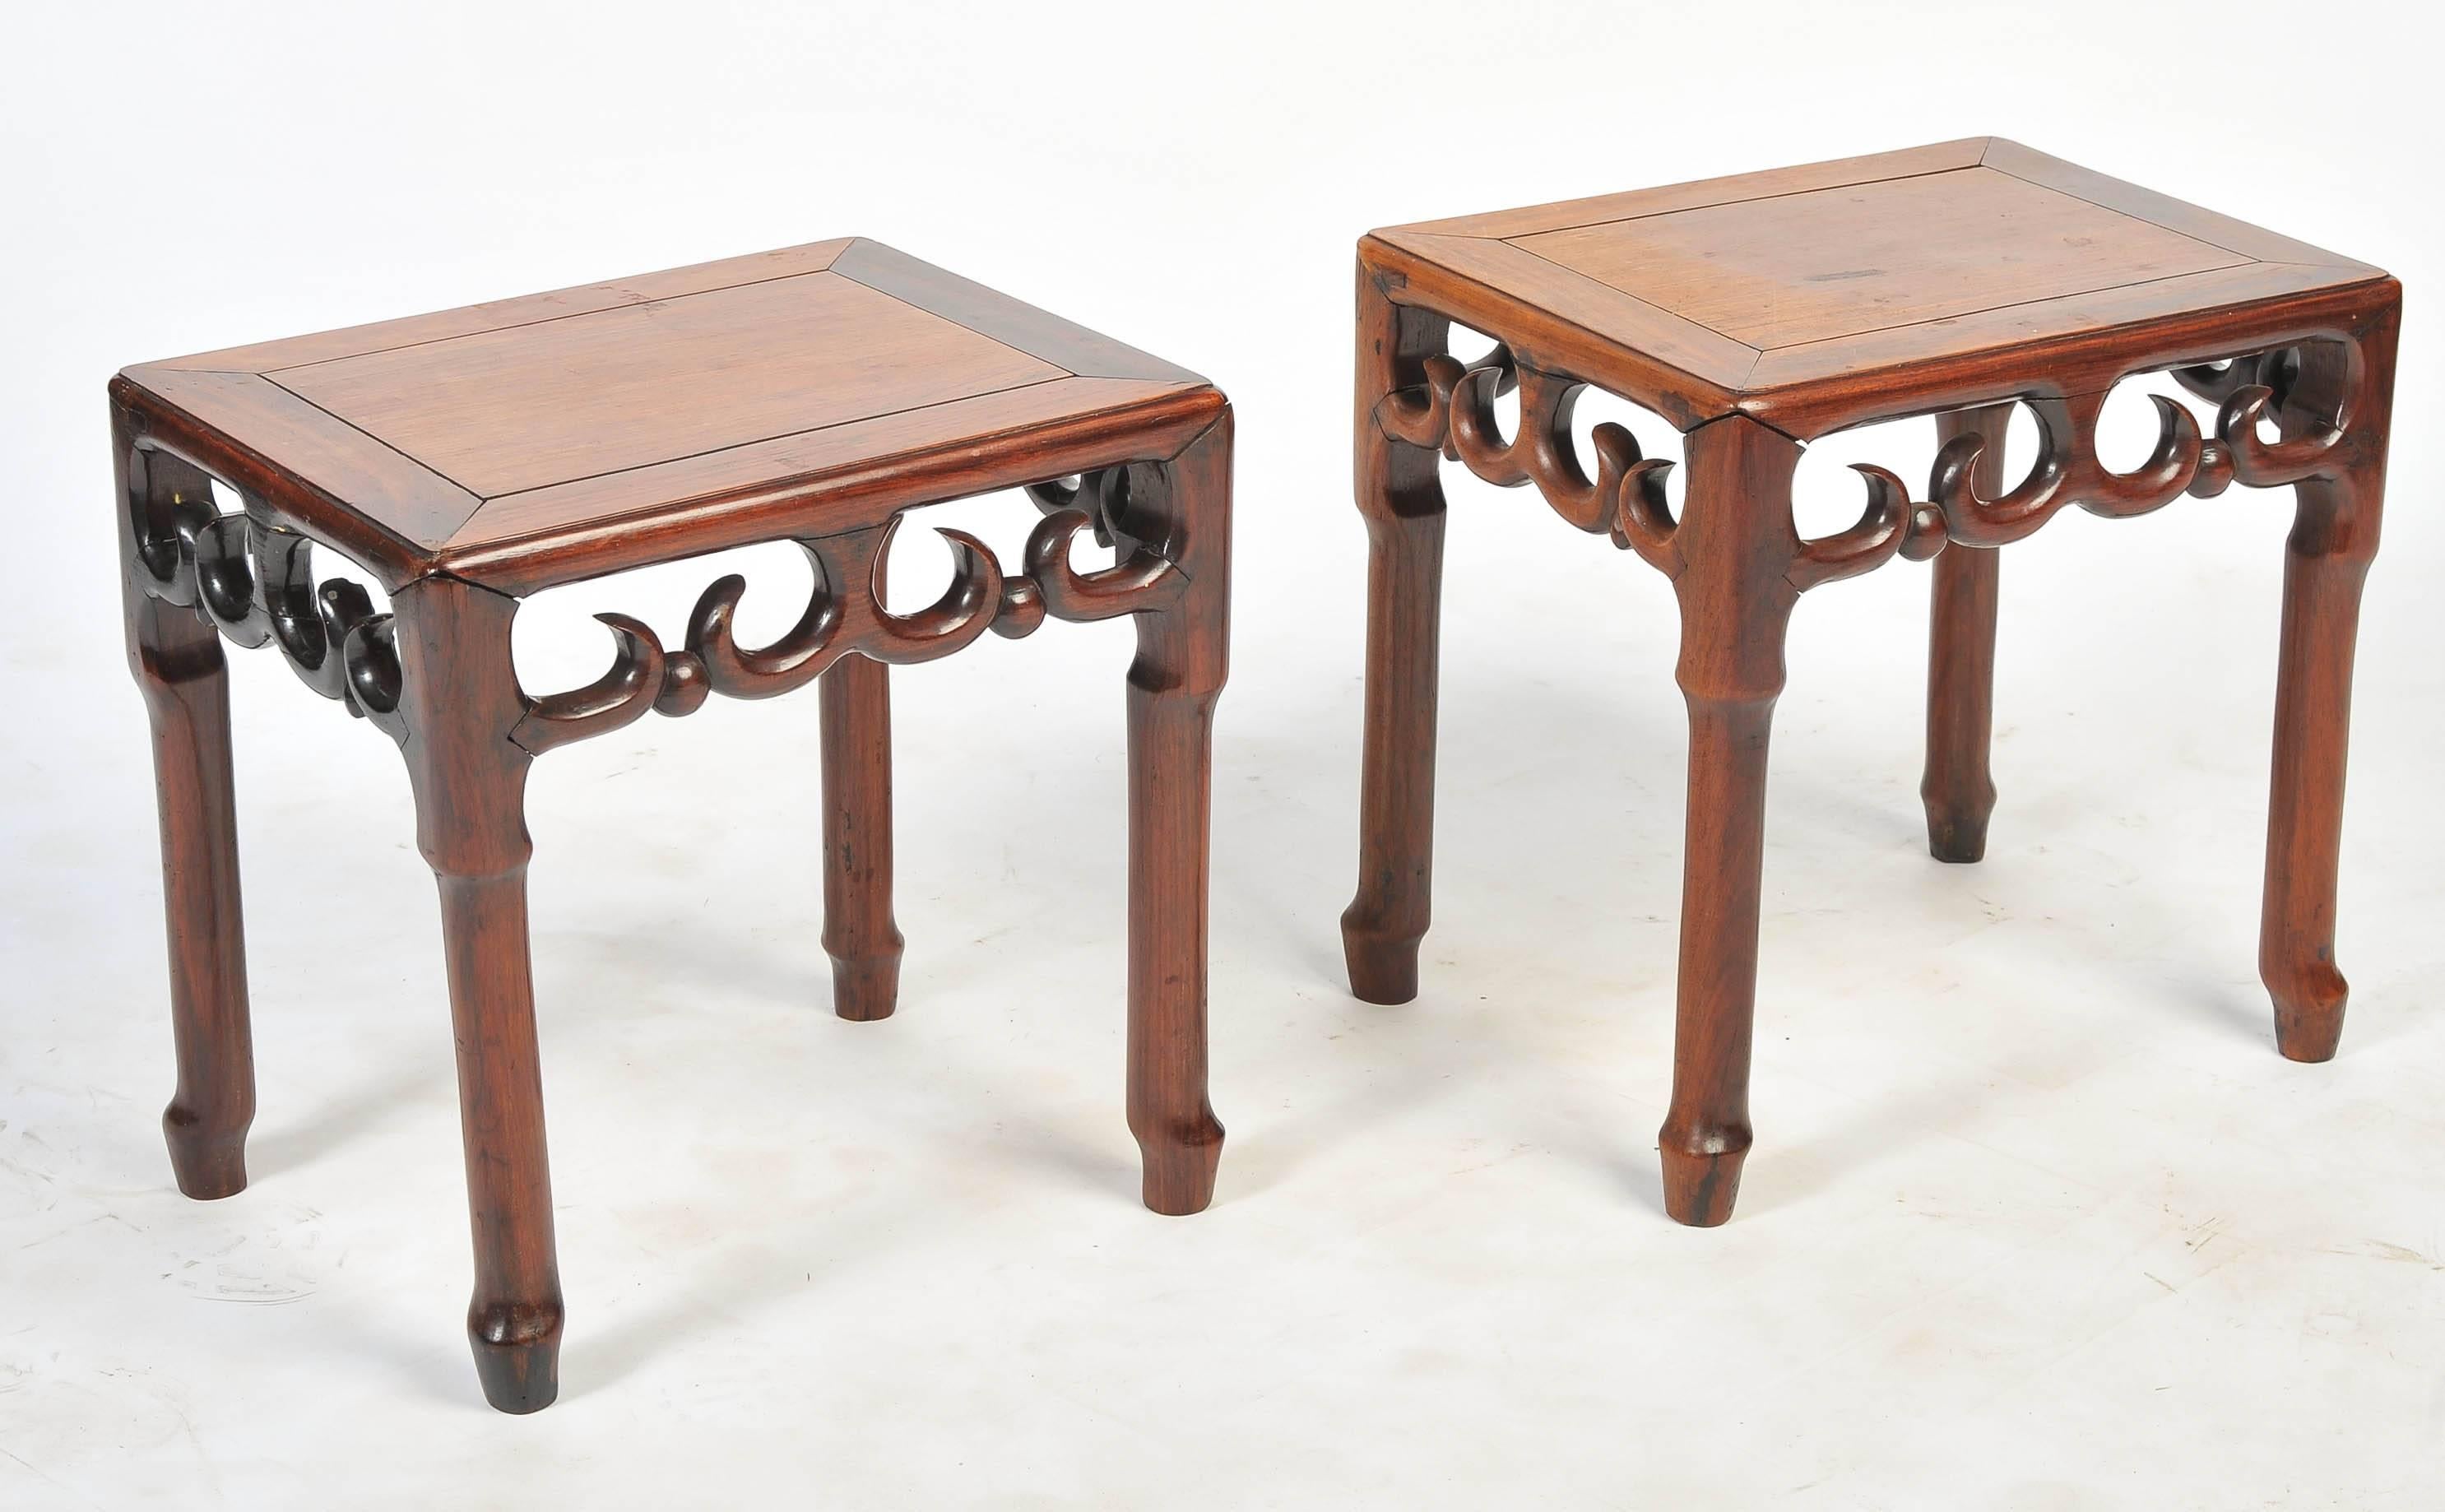 A good quality pair of 19th century Chinese hardwood side tables having an inset wooden top, carved frieze and legs.